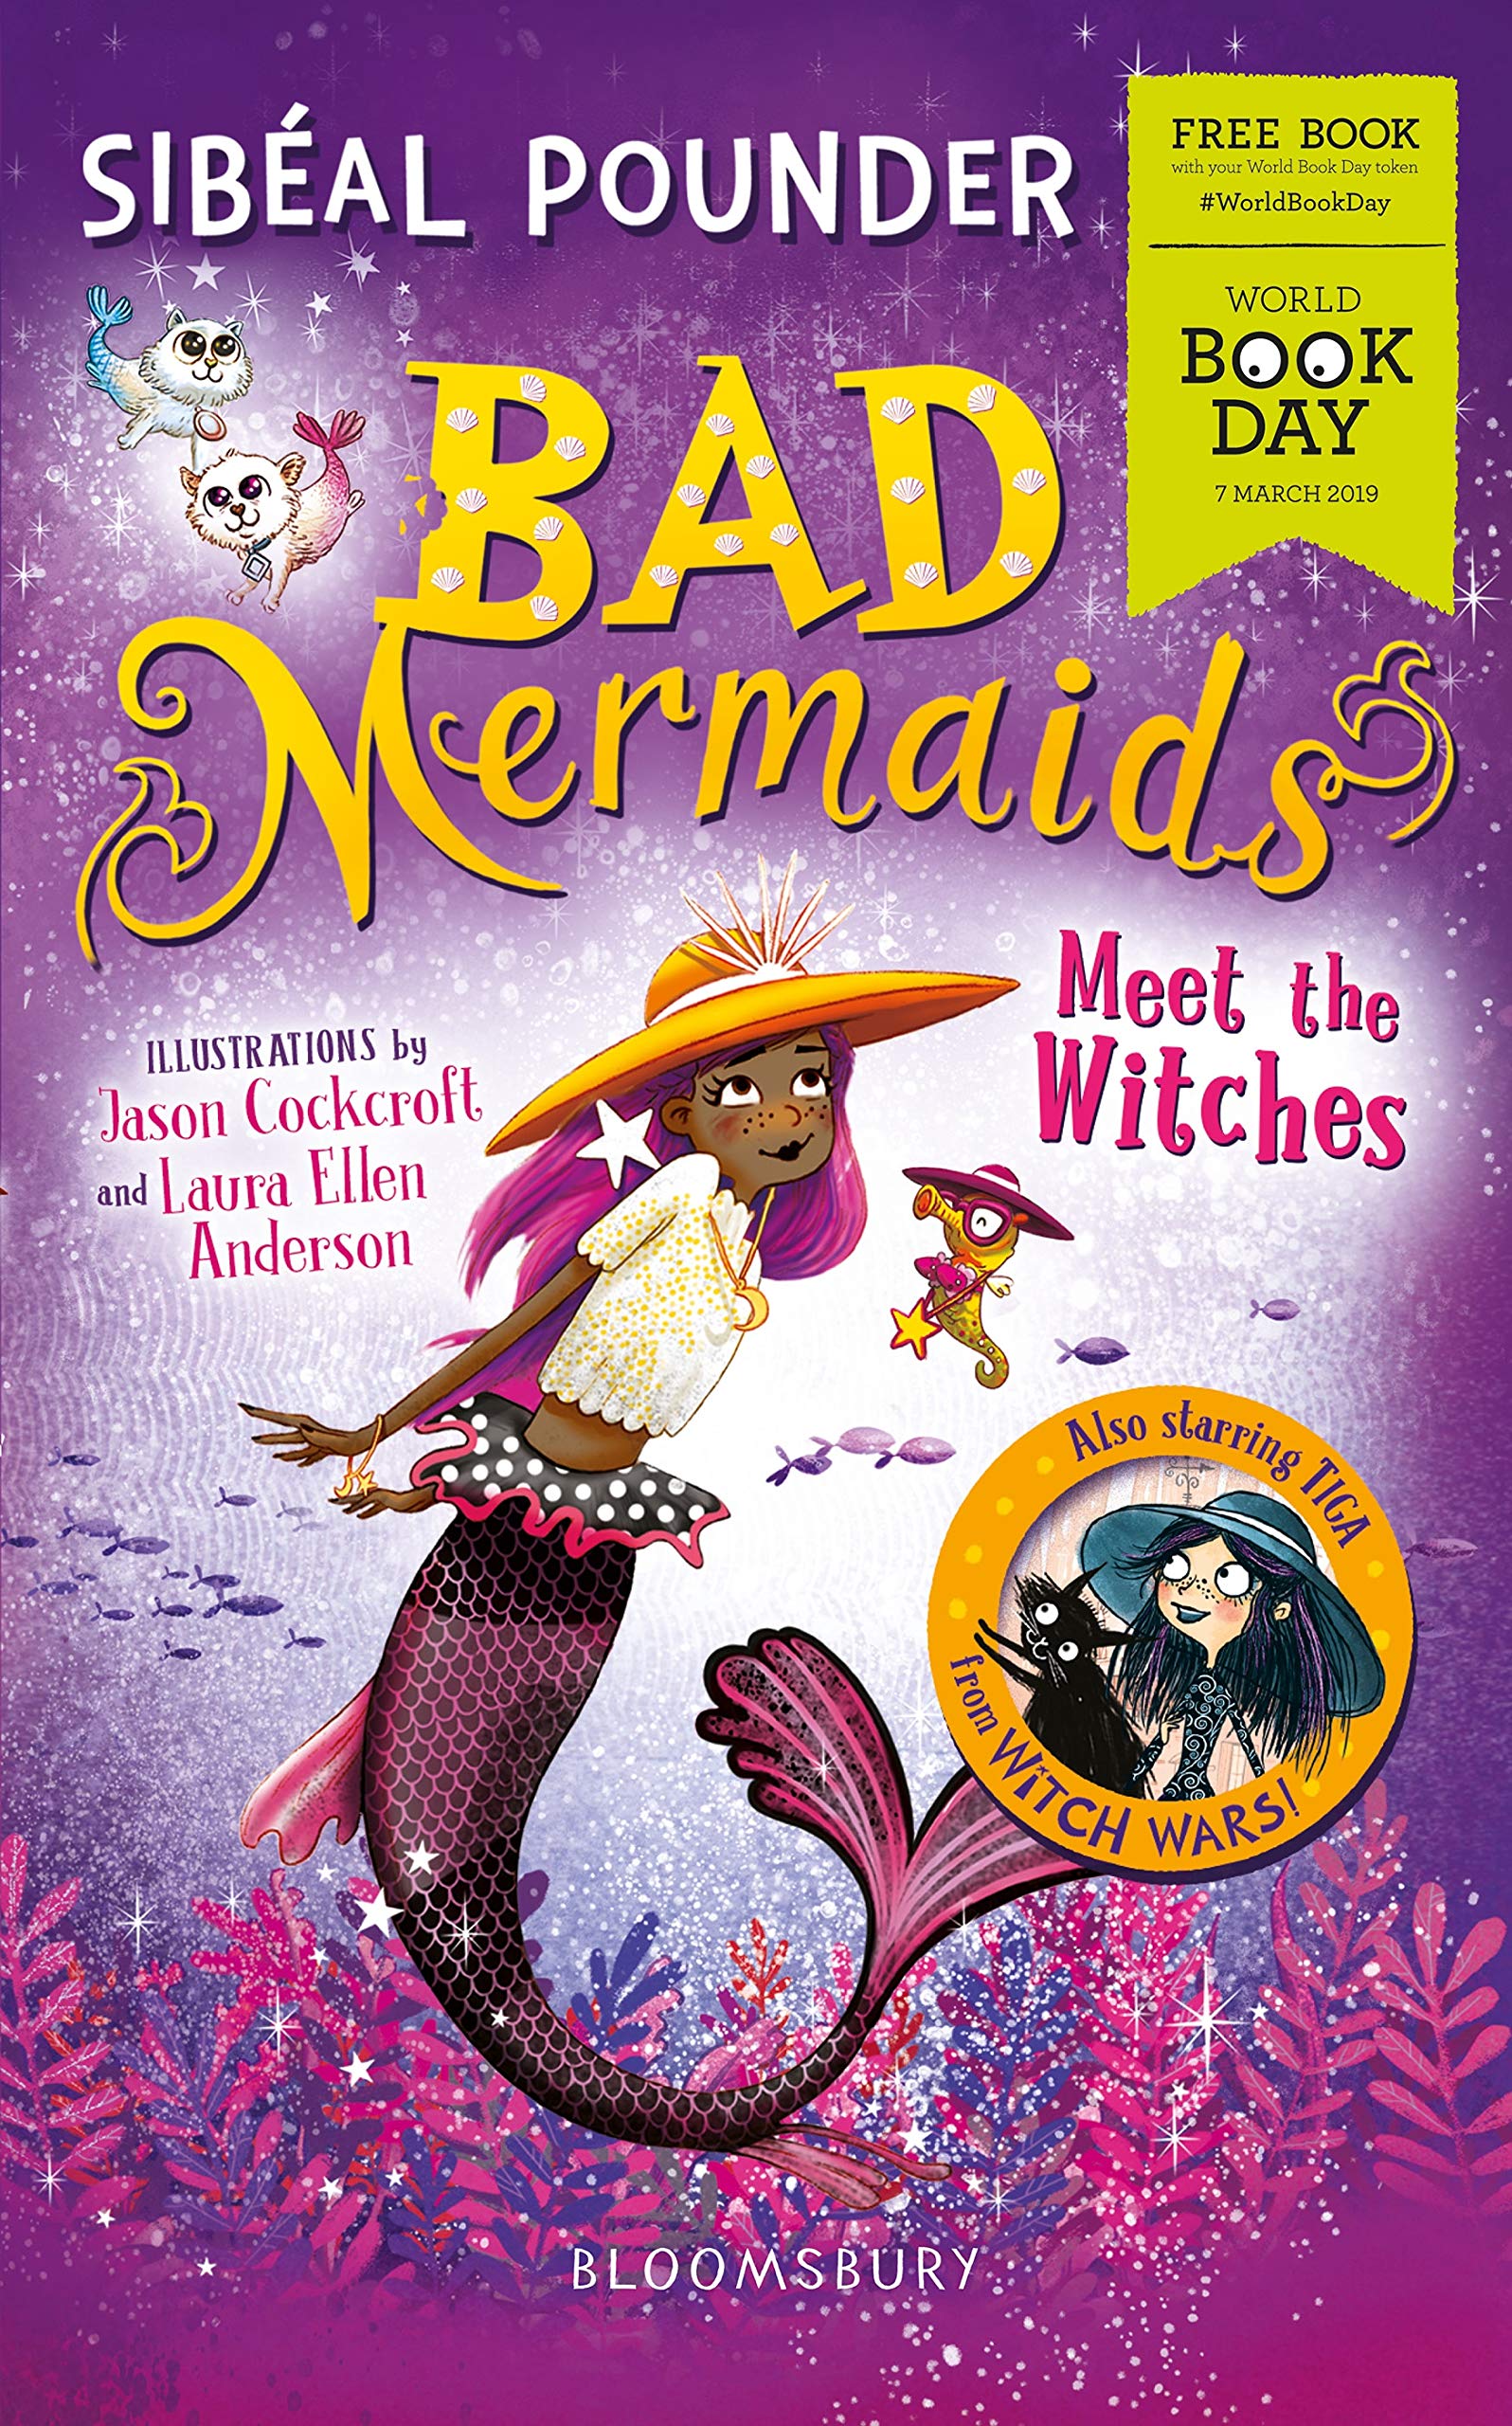 Bad Mermaids - Meet the witches